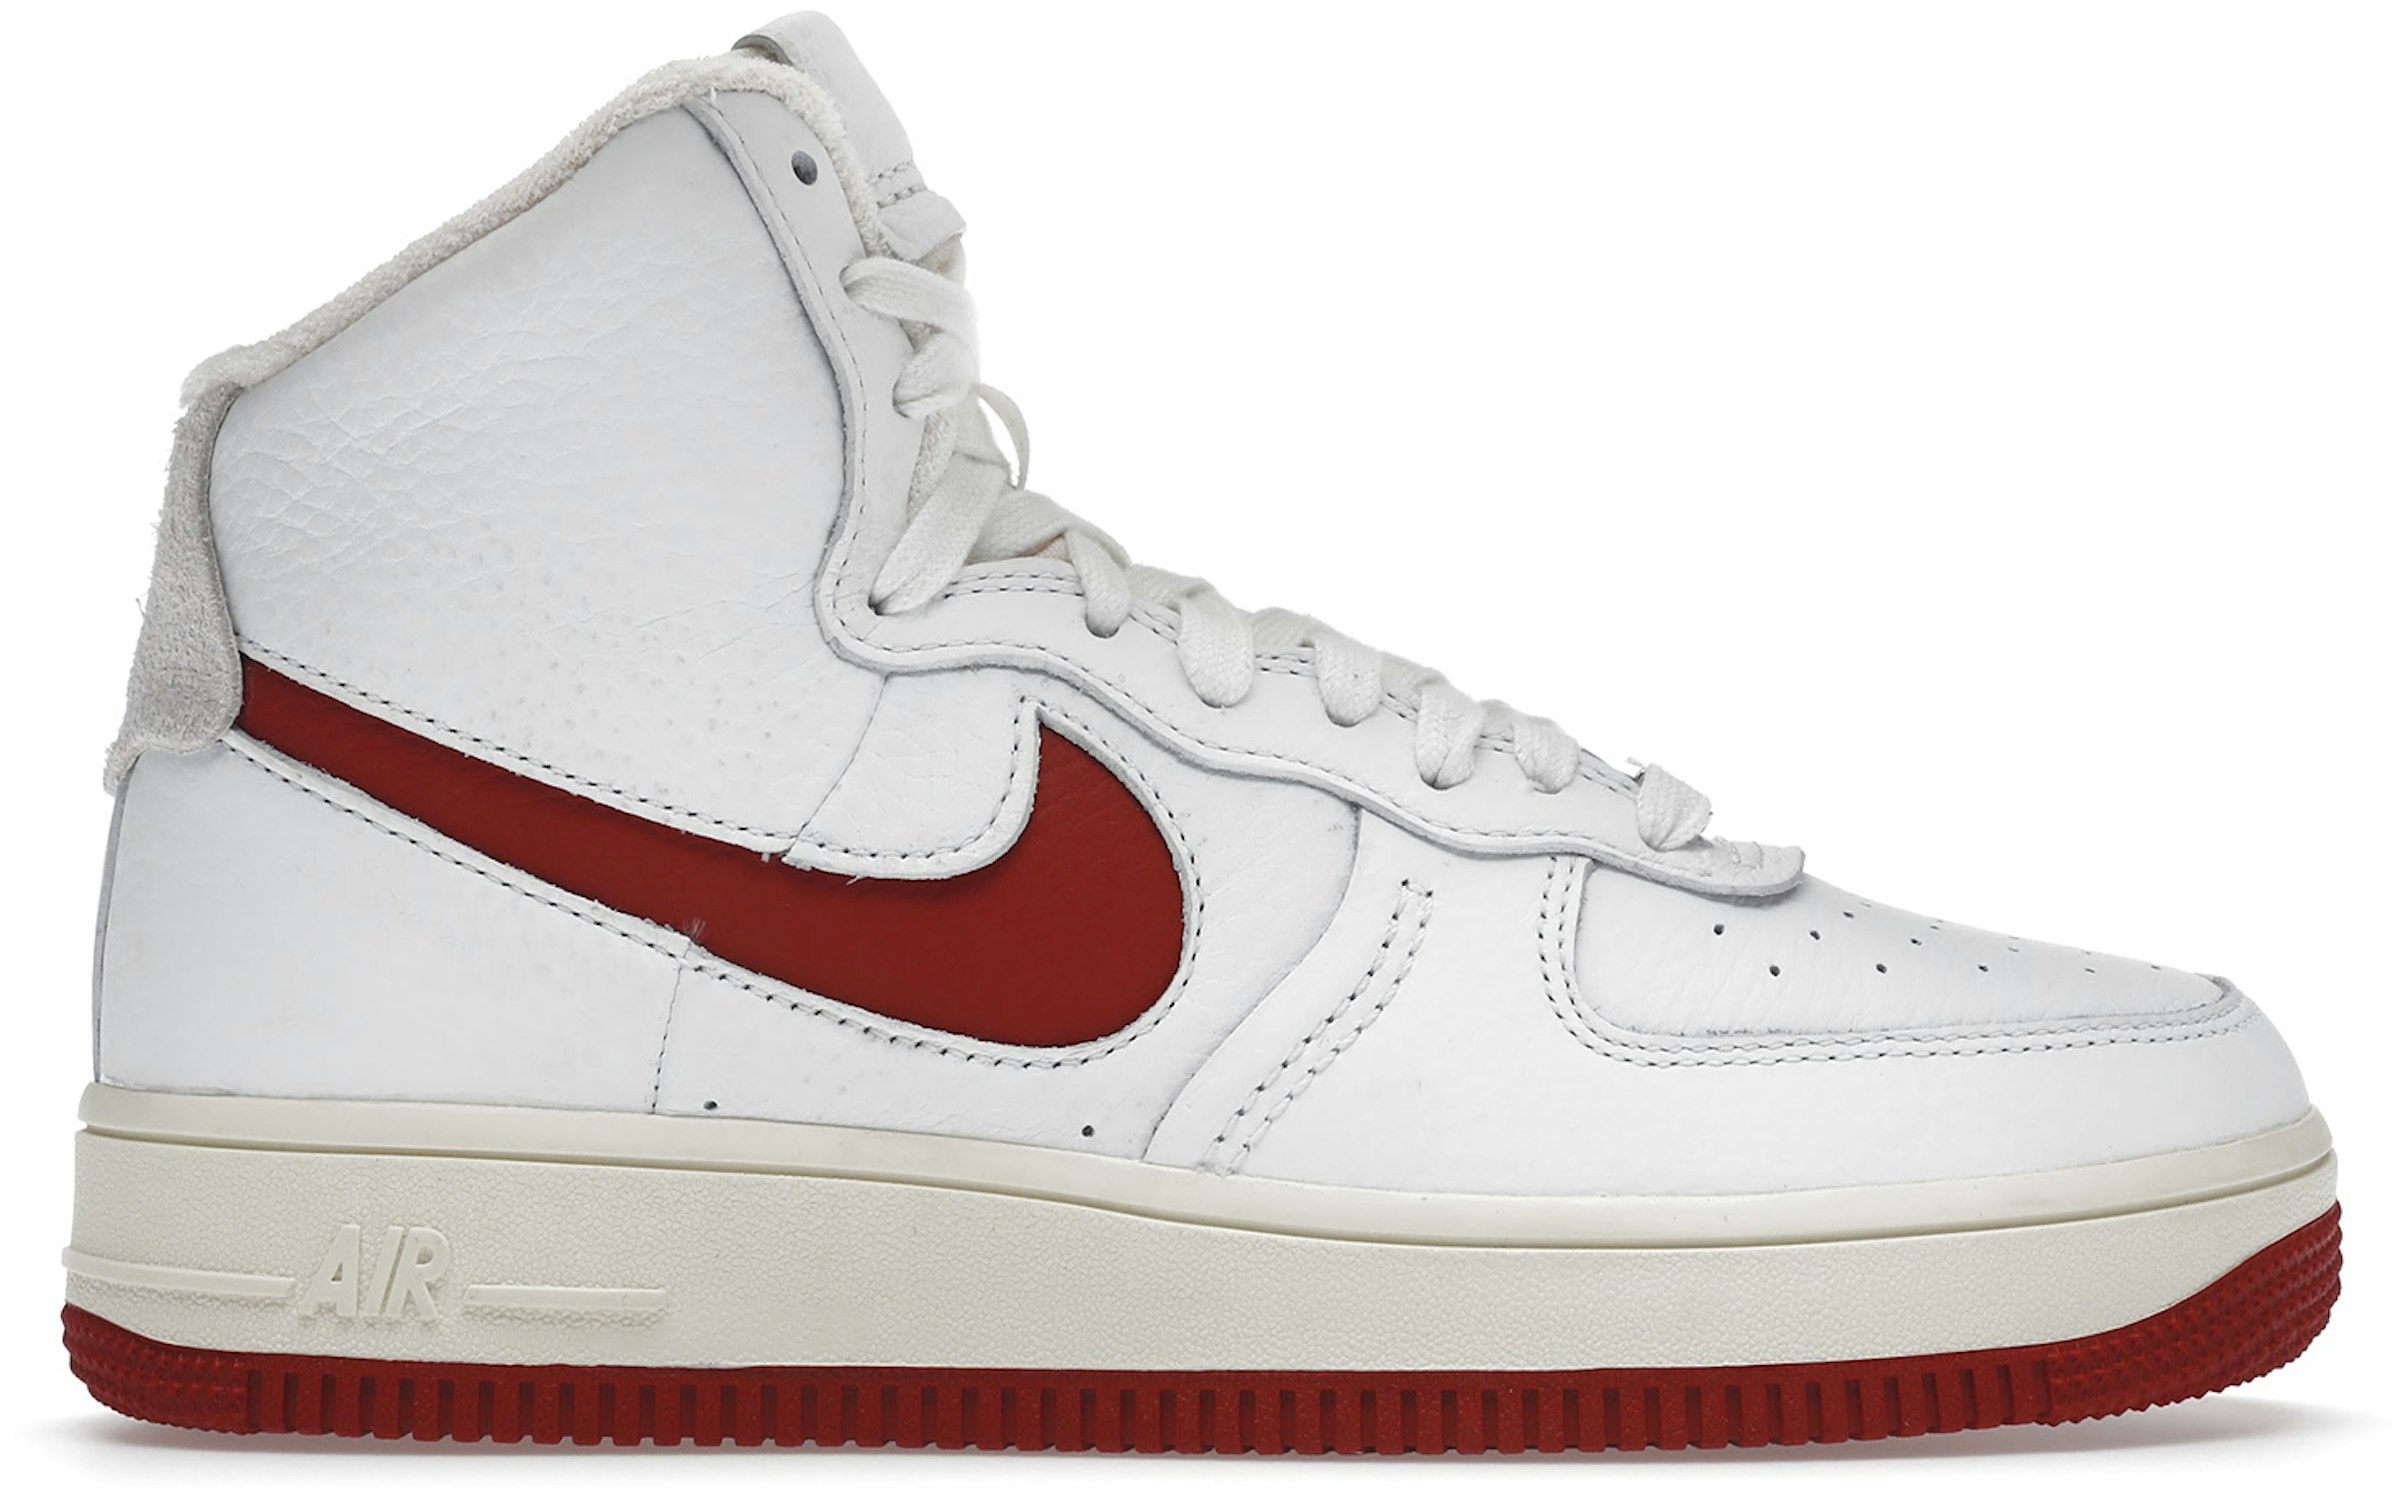 repetitie Embryo genade Nike Air Force 1 High Sculpt Summit White Gym Red (Women's) - DC3590-100 -  US